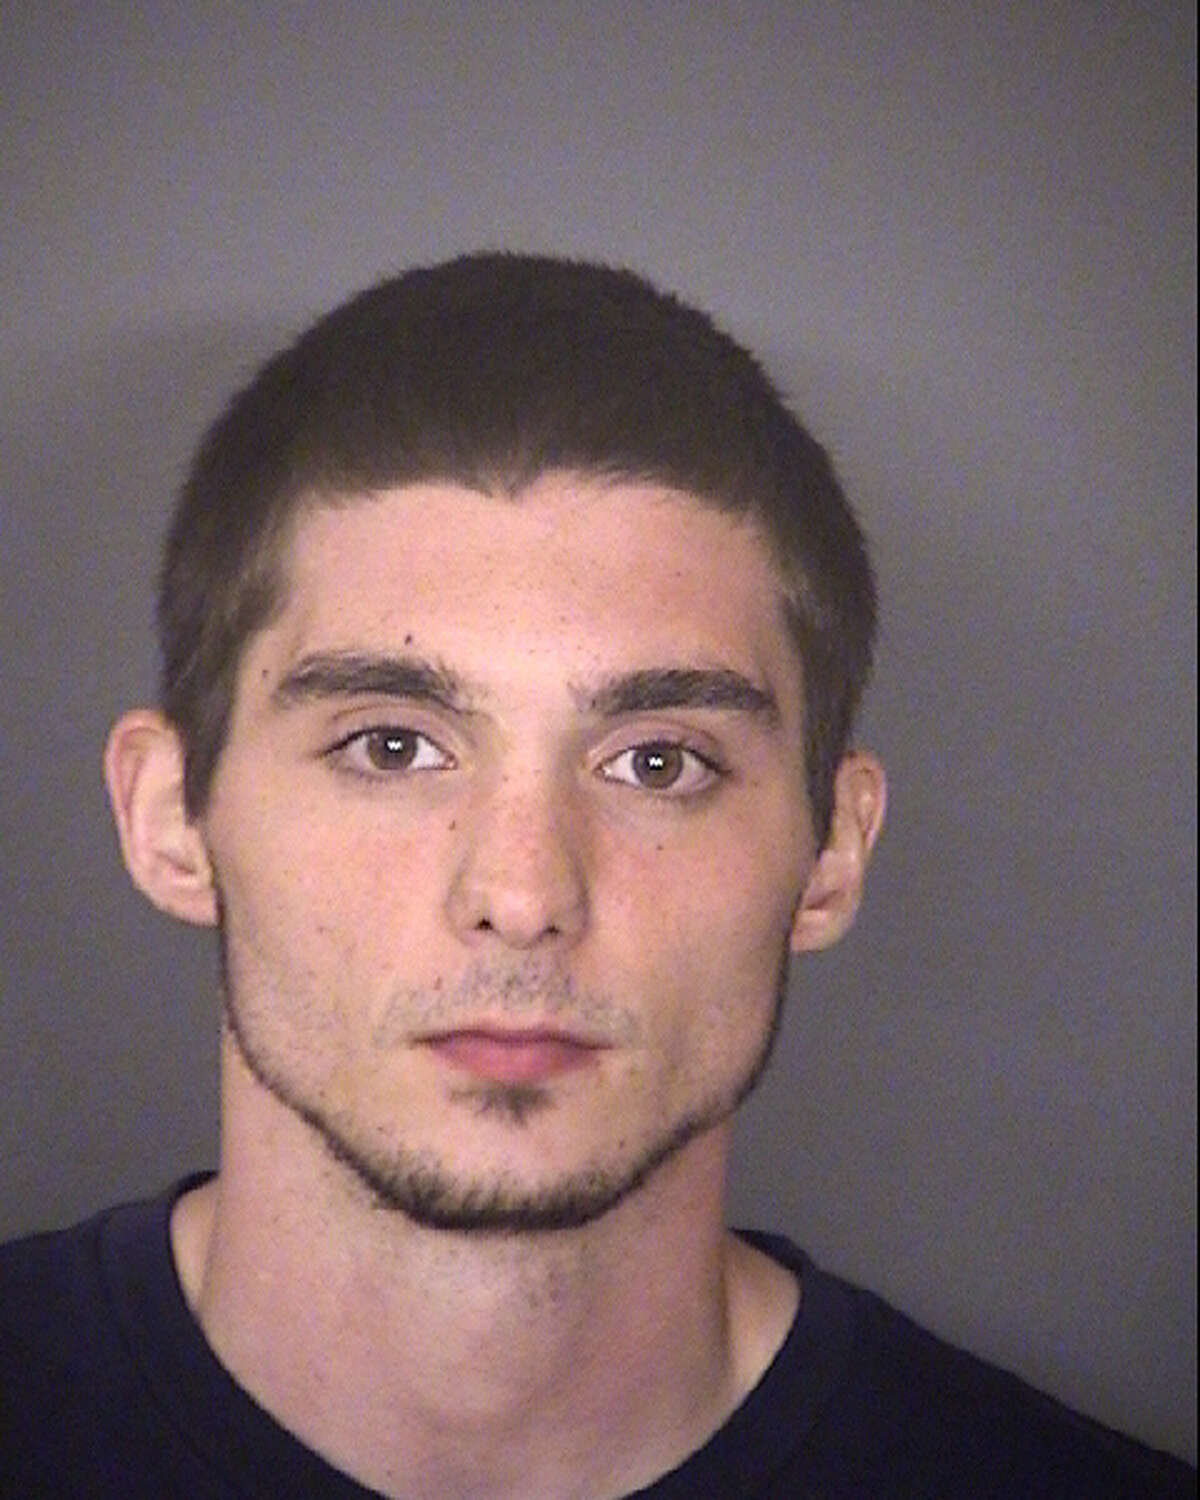 Joshua Rodriguez was charged with aggravated robbery and aggravated assault with a deadly weapon.